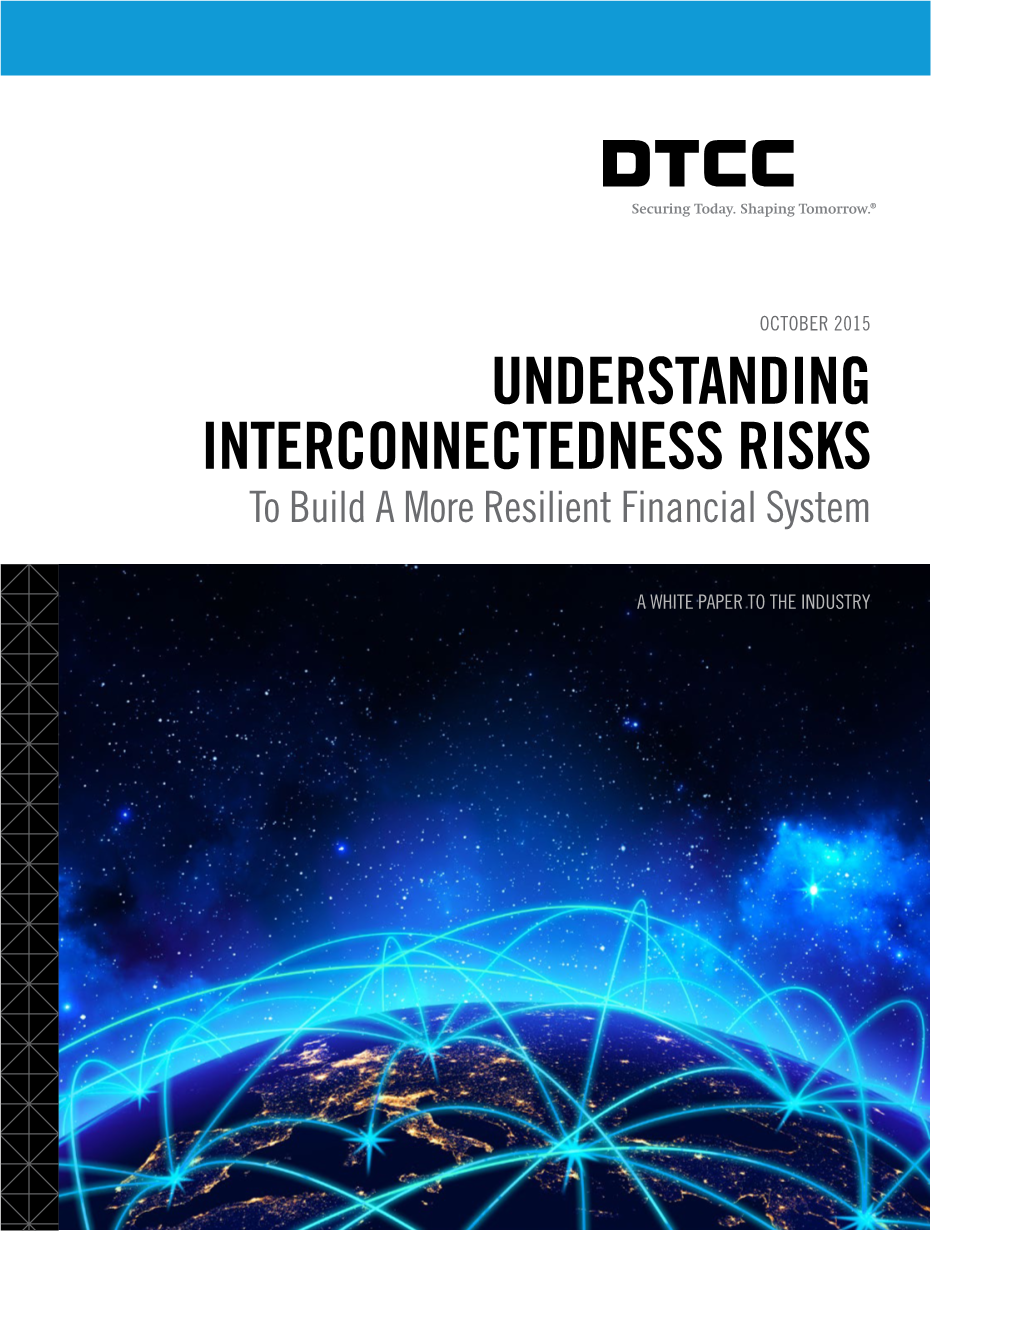 UNDERSTANDING INTERCONNECTEDNESS RISKS to Build a More Resilient Financial System